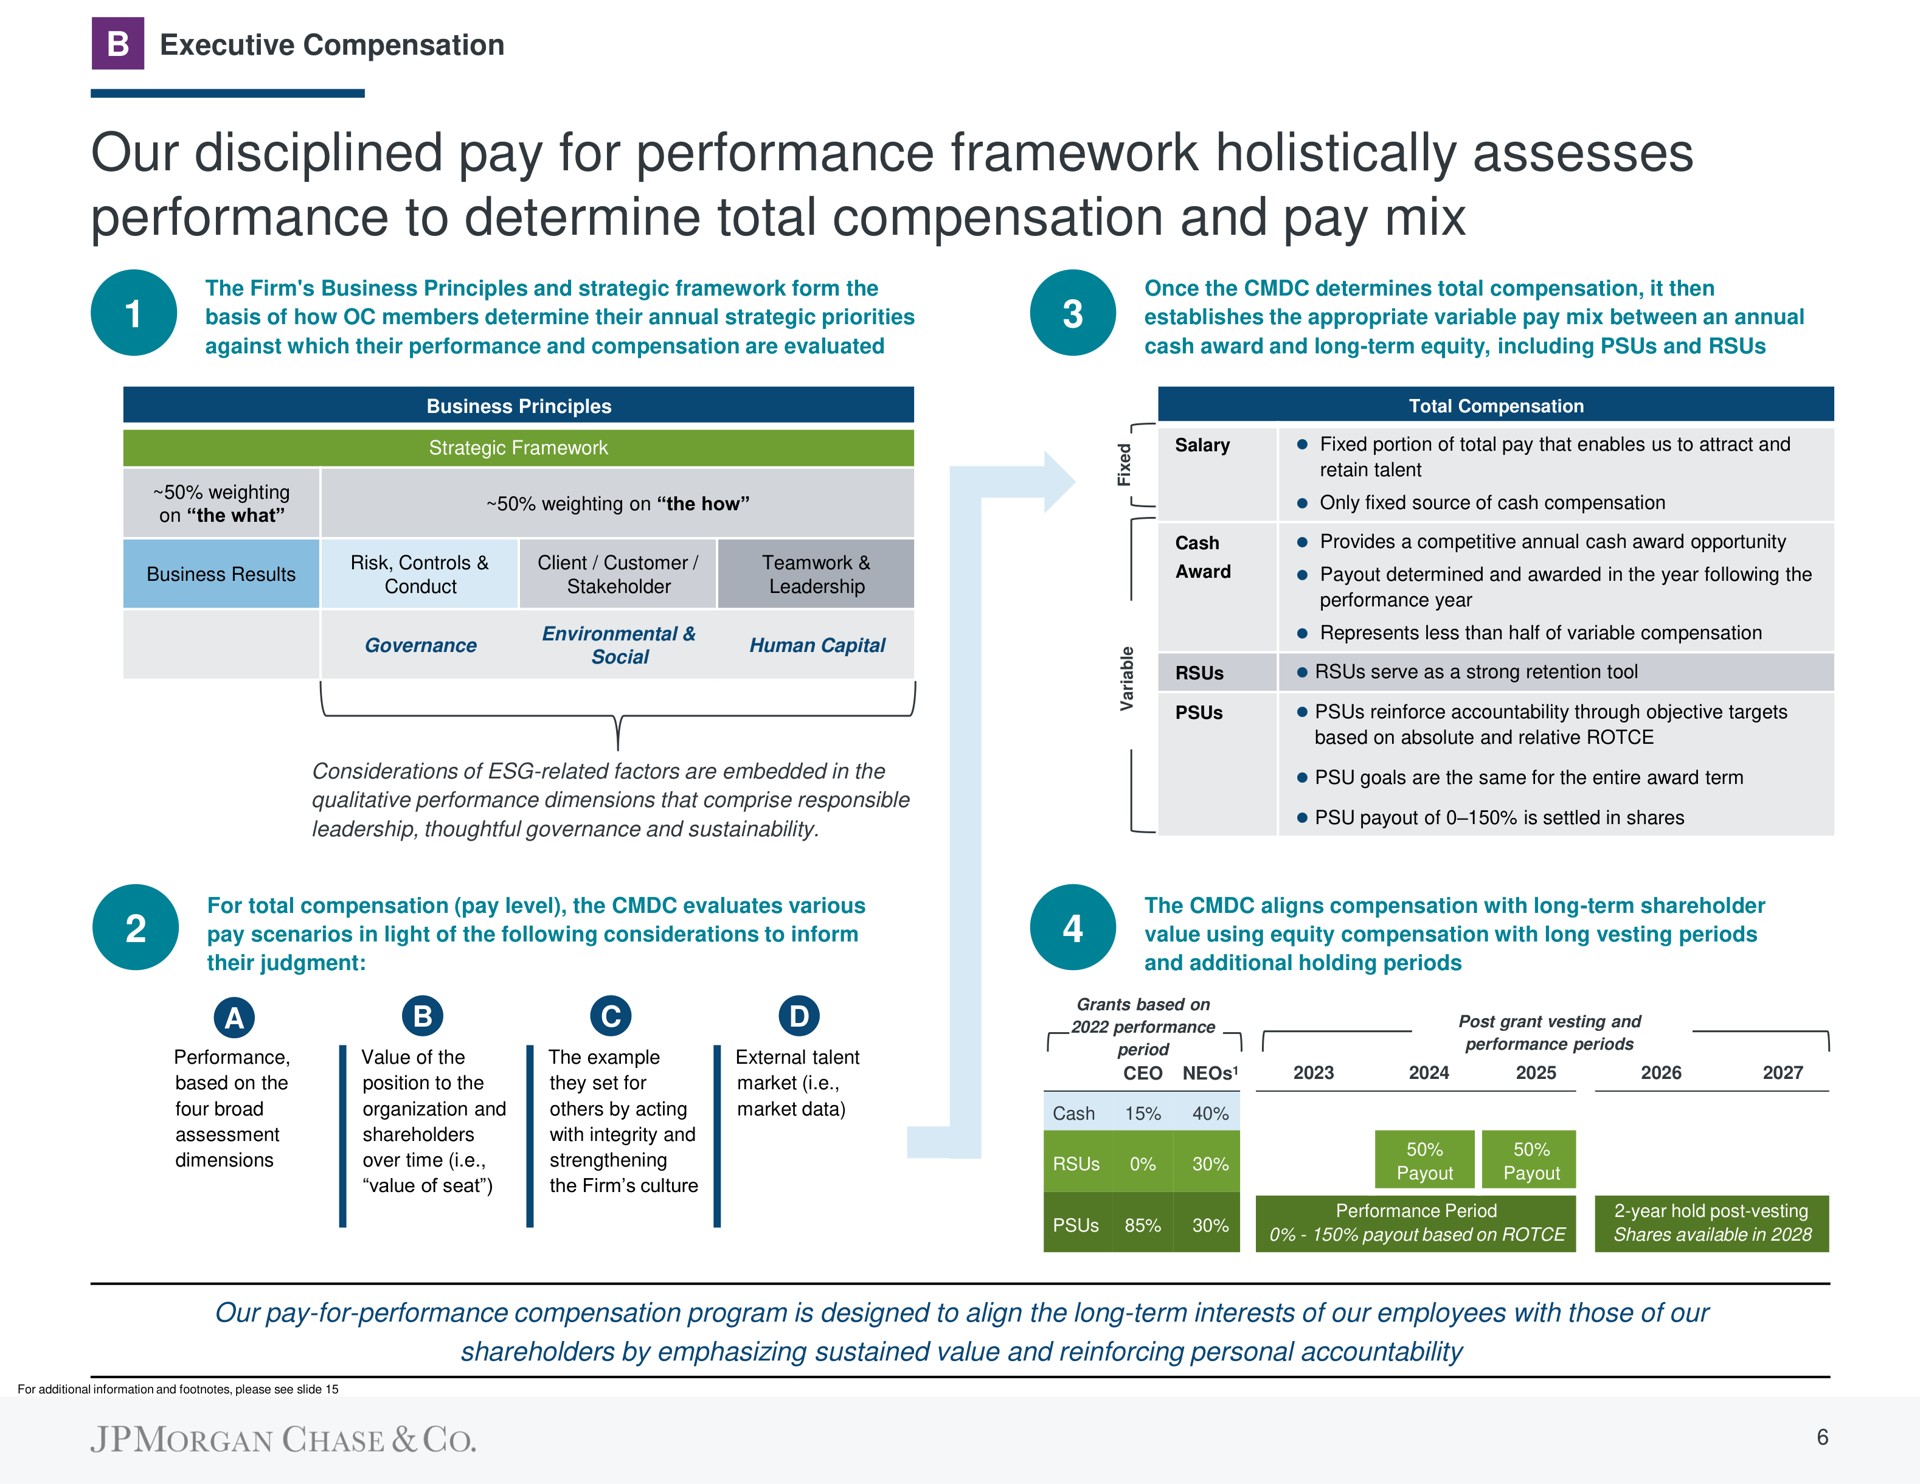 our disciplined pay for performance framework holistically assesses performance to determine total compensation and pay mix | J.P.Morgan